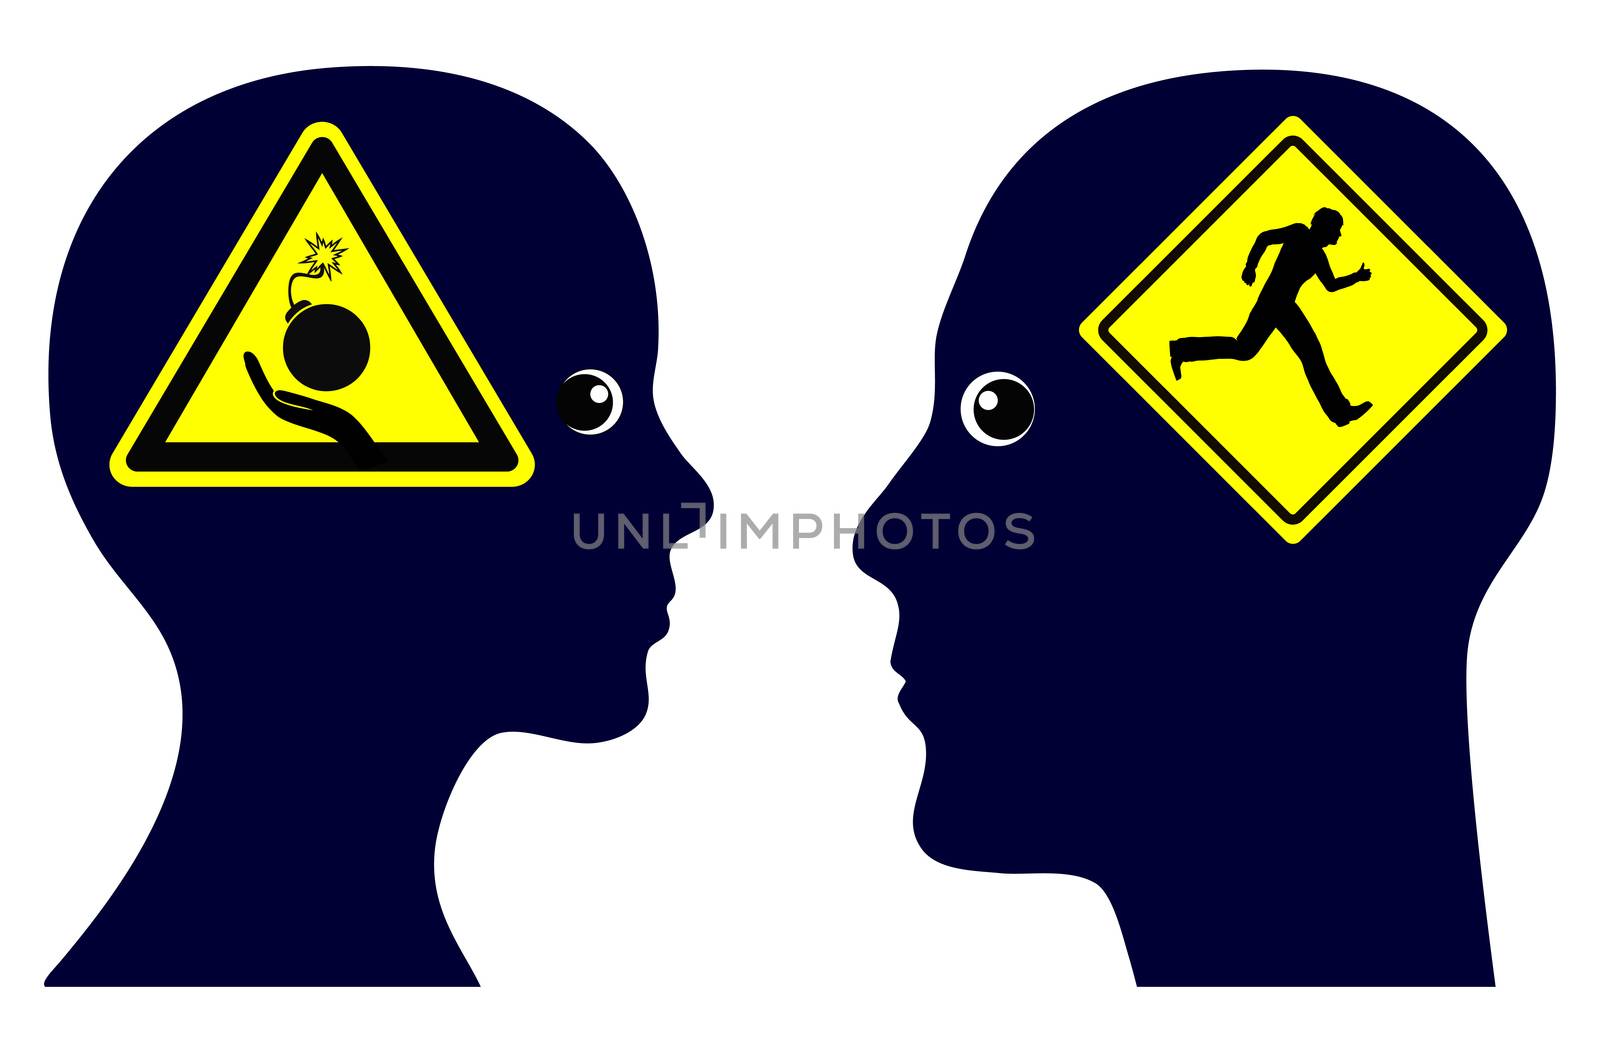 Concept sign of communication problems between couple putting an end to the relationship